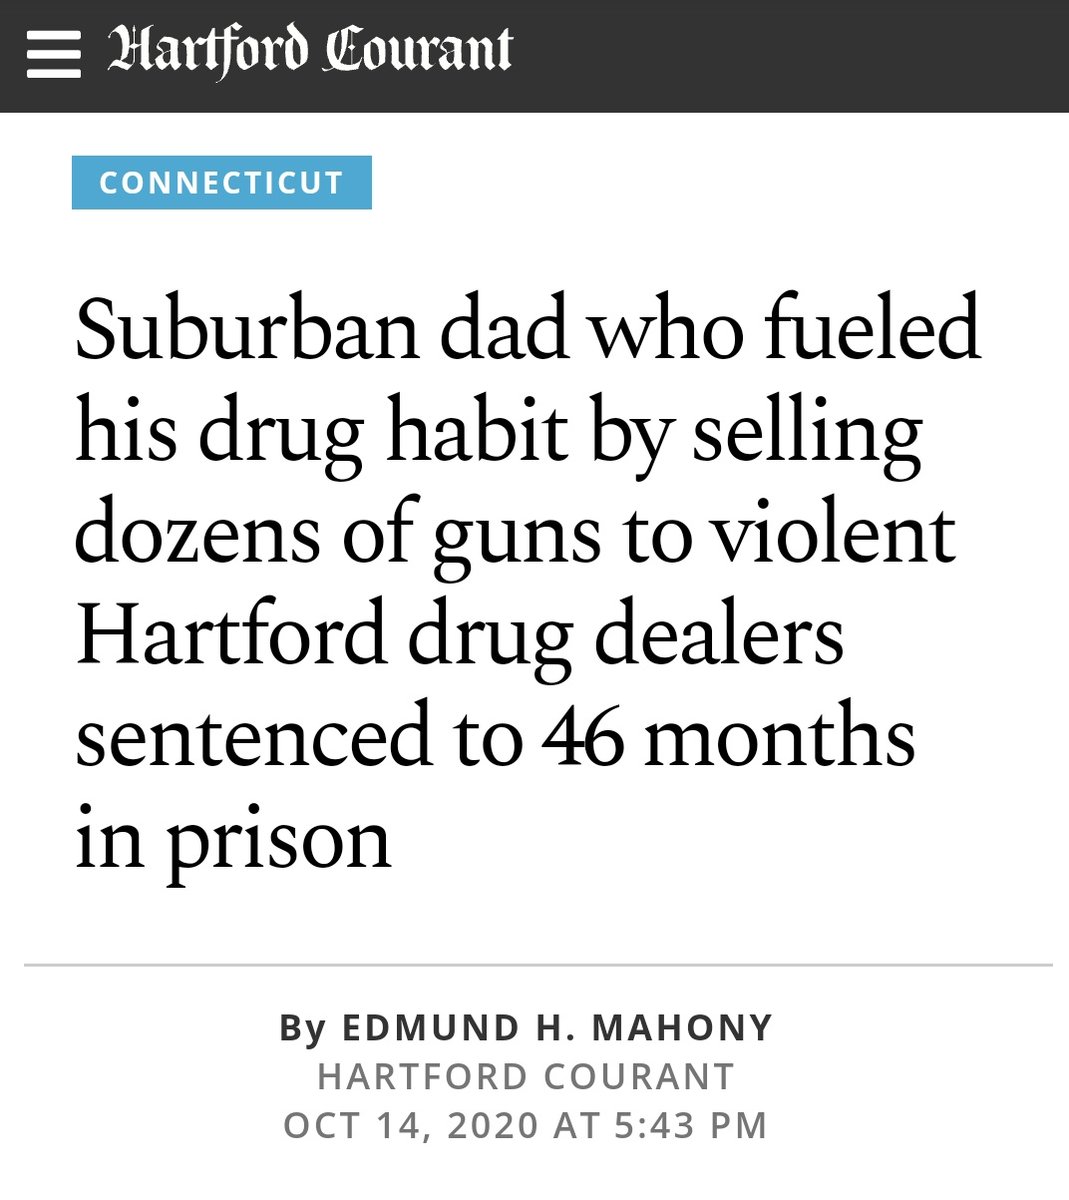 The other day,  @constanz_a was pointing out how much room this story makes for this guy's humanity and how little it makes for the humanity of the people who bought the guns: